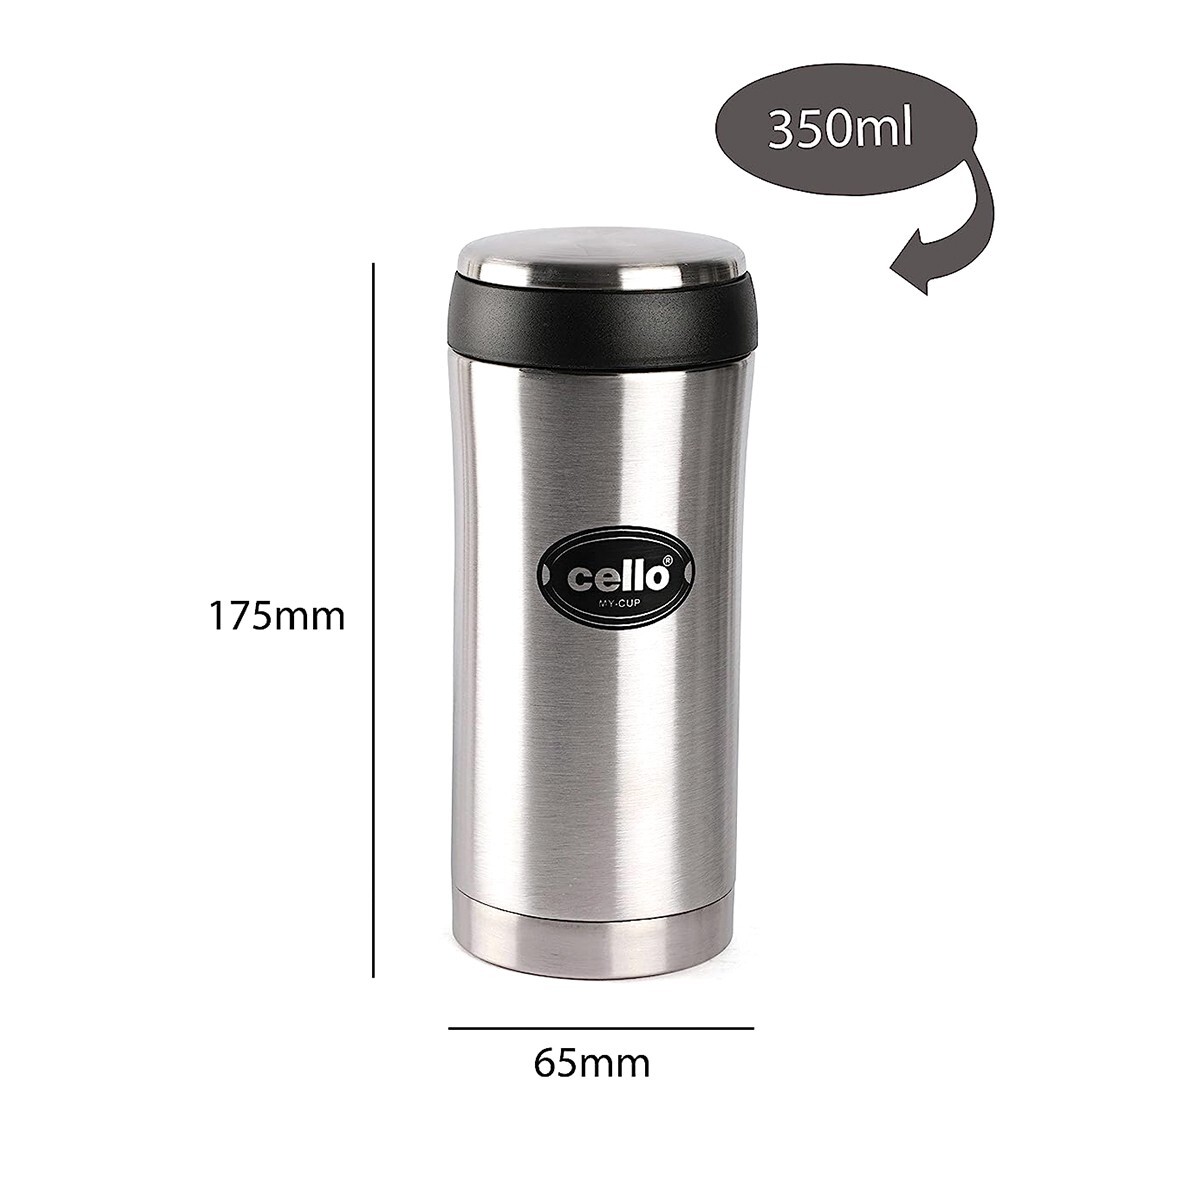 Cello Stainless steel Mycup Flask 350ml